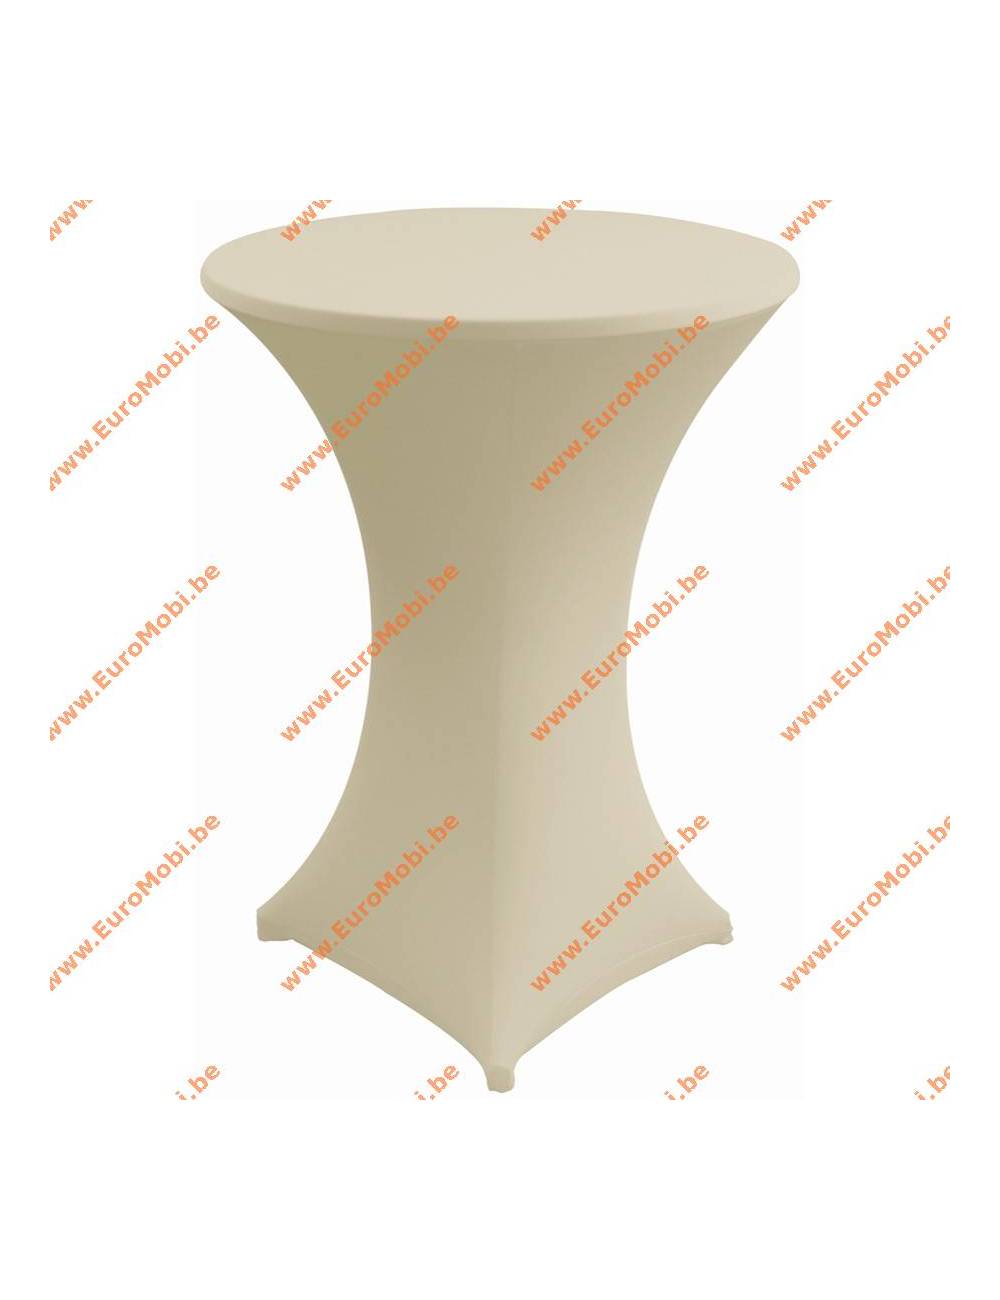 Cover and top stretch for standing table round ligth grey brown